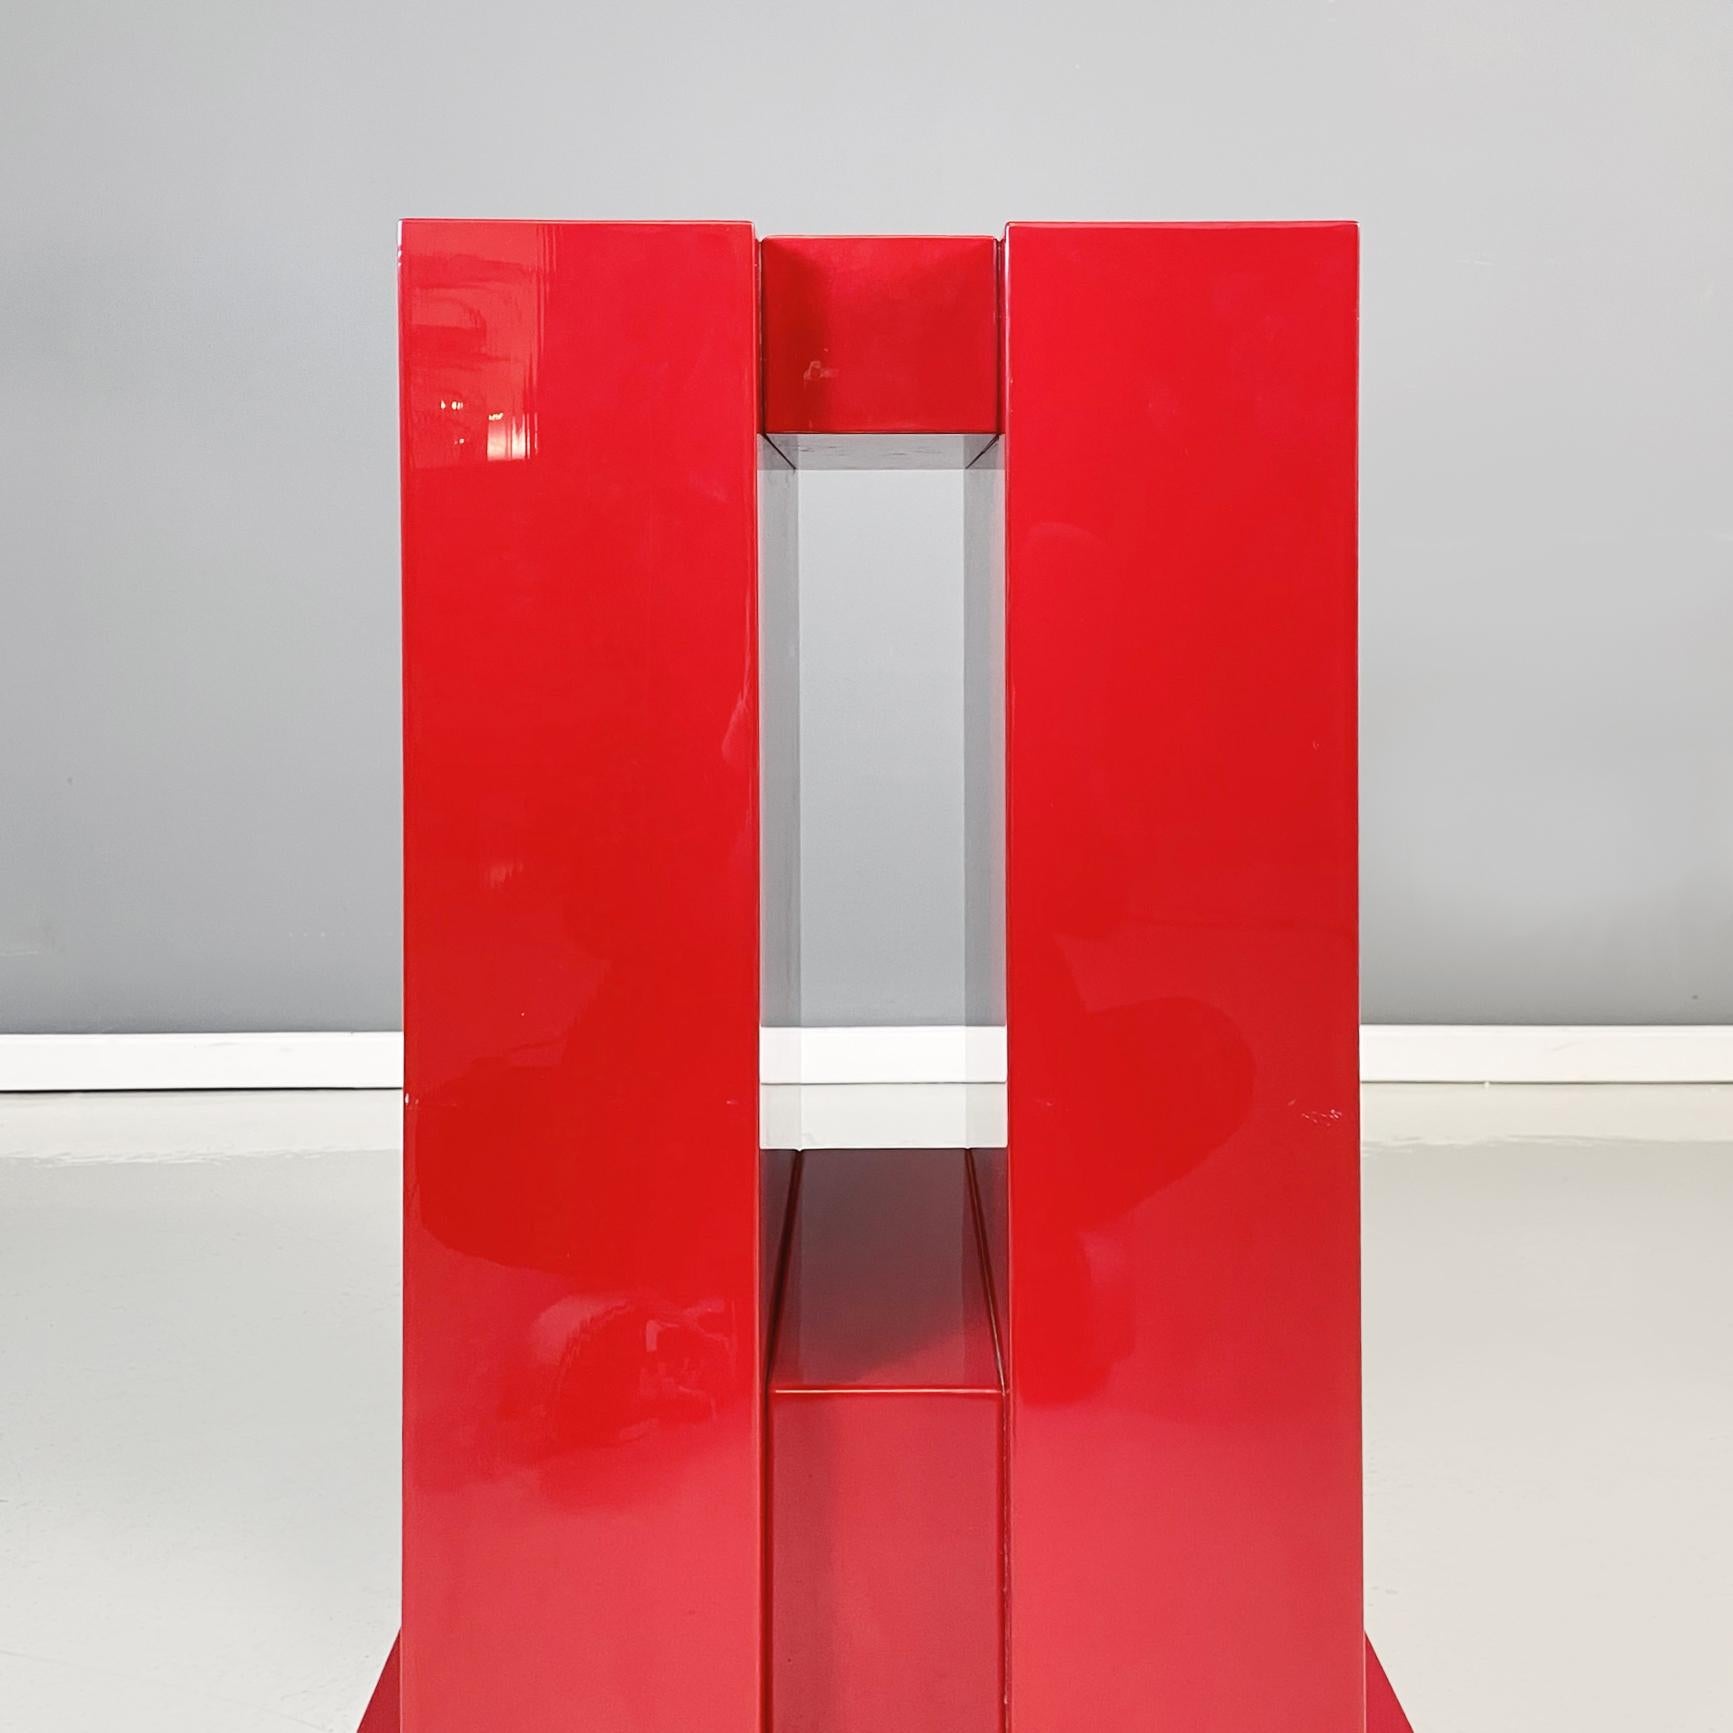 Late 20th Century Italian Midcentury Geometric Pedestal in Red Lacquered Wood, 1980s For Sale